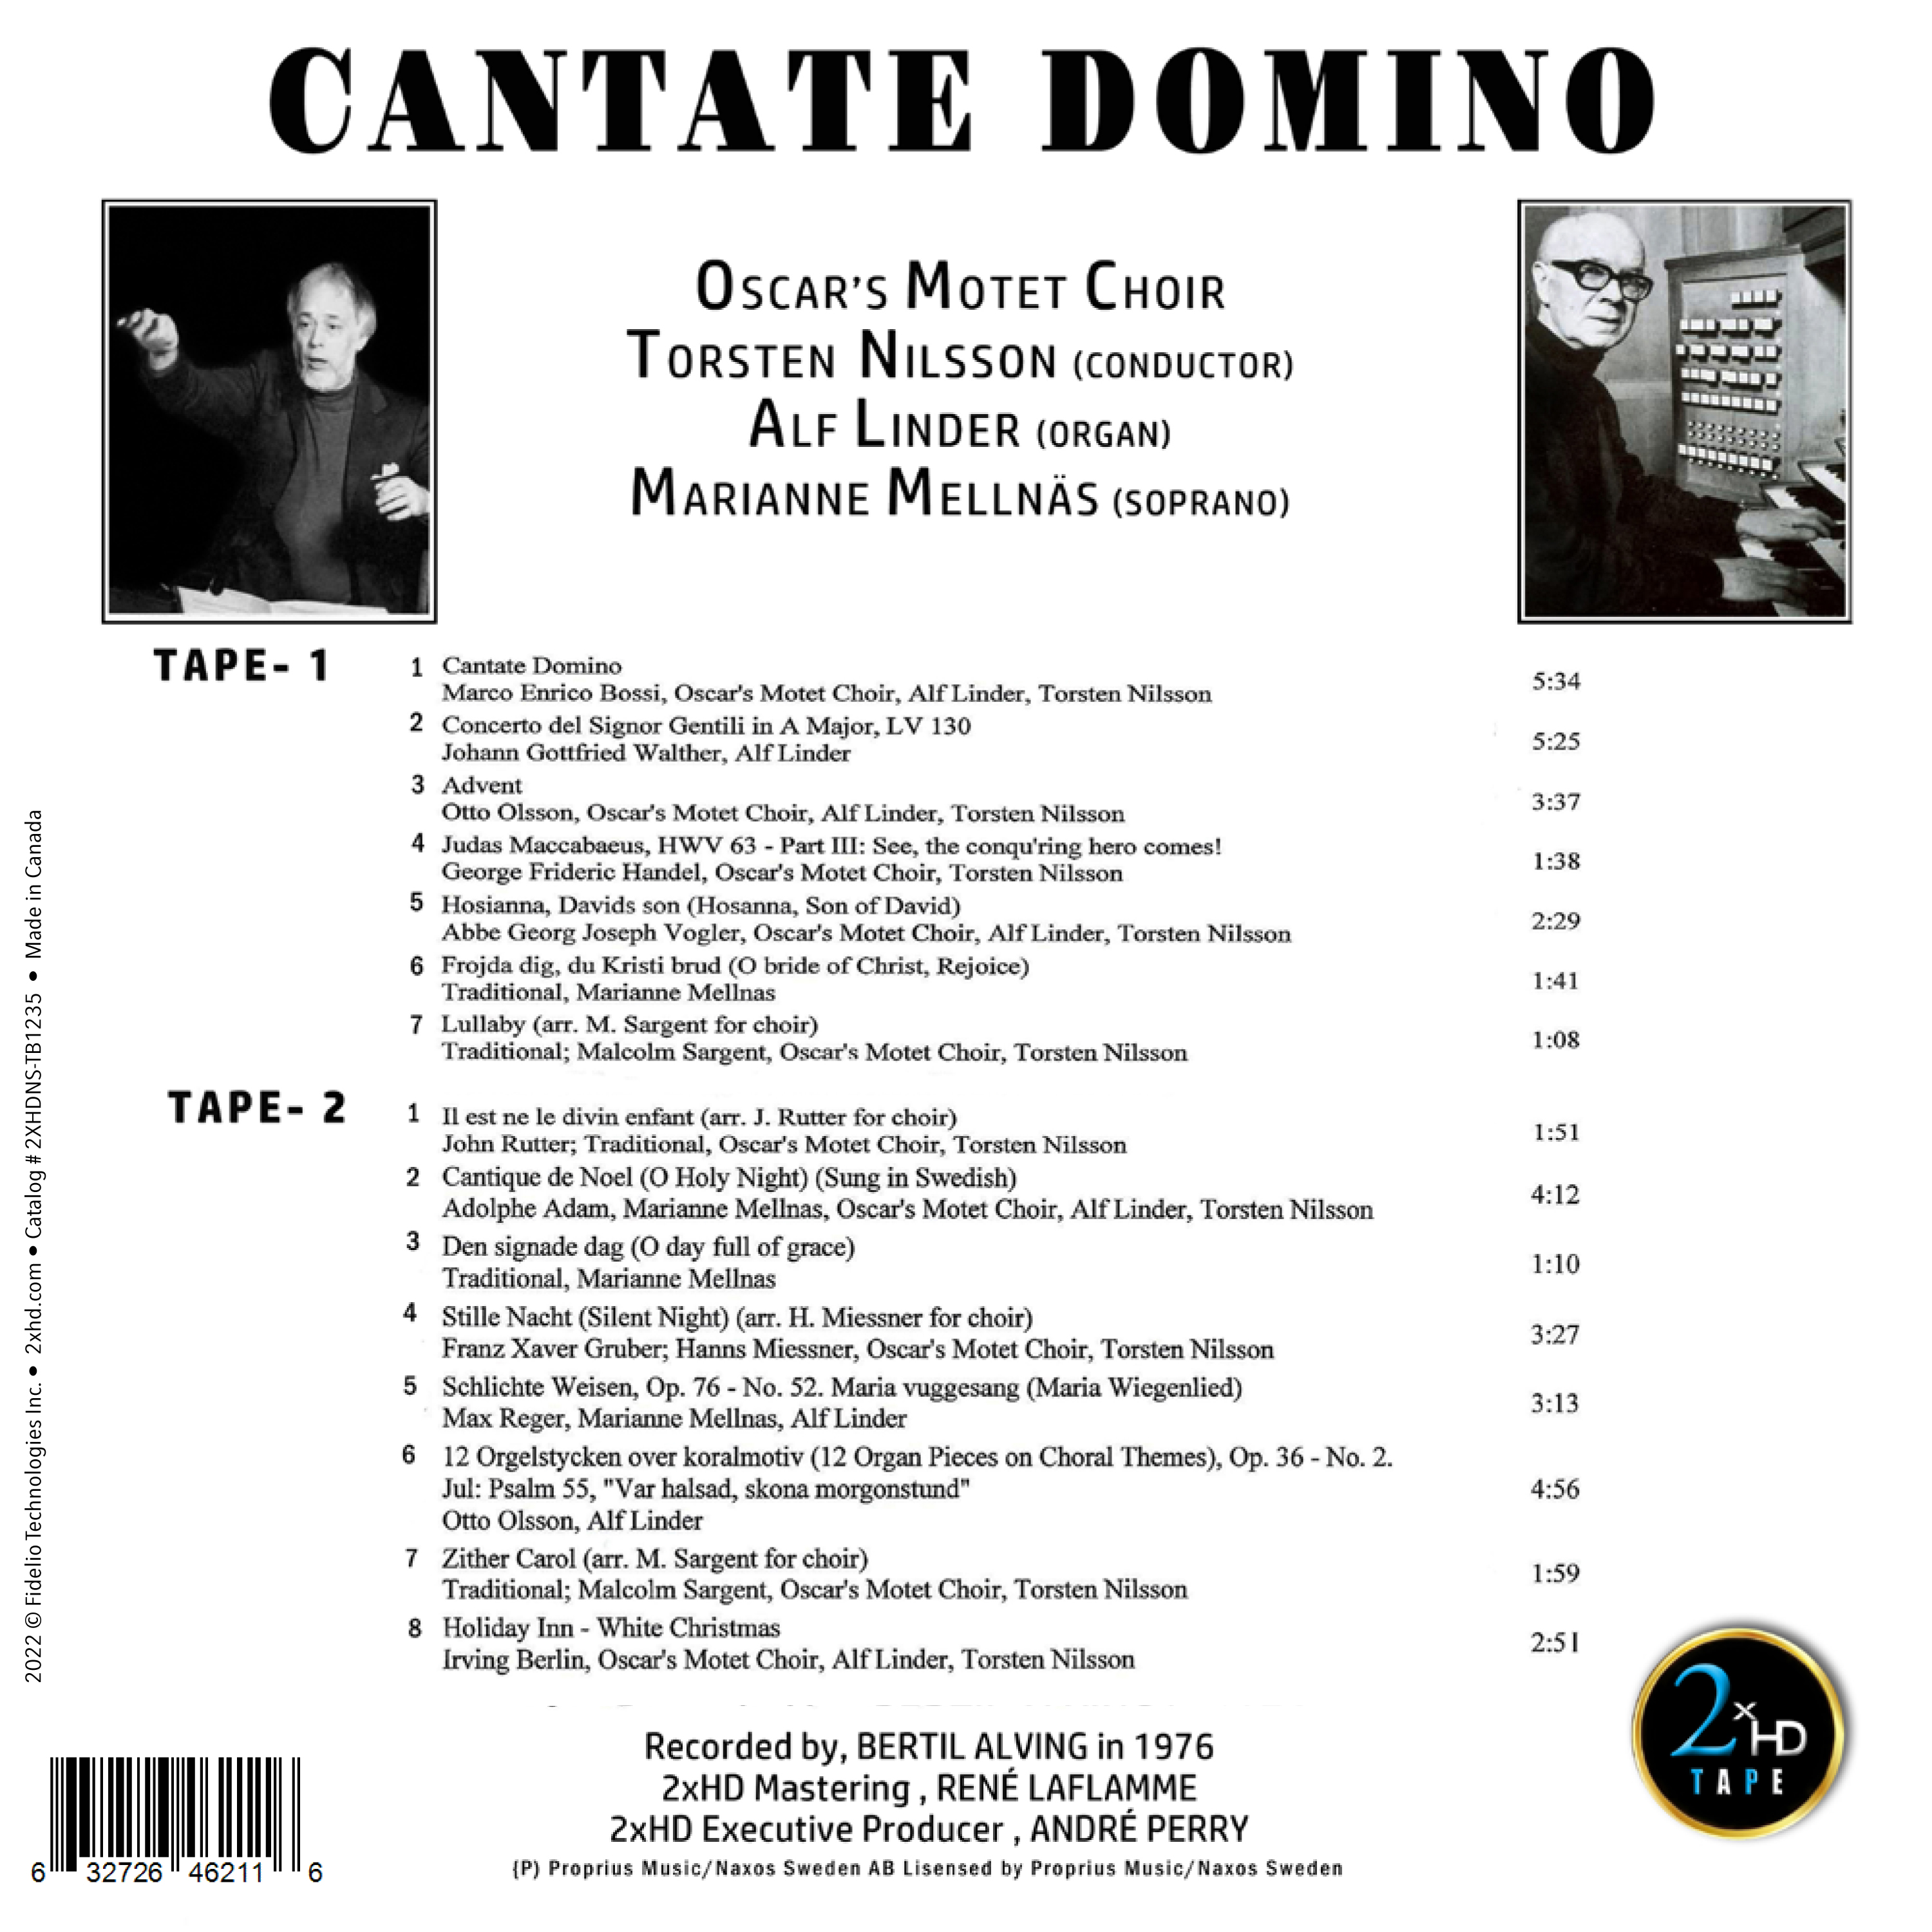 Cantate_Domino-back-cover